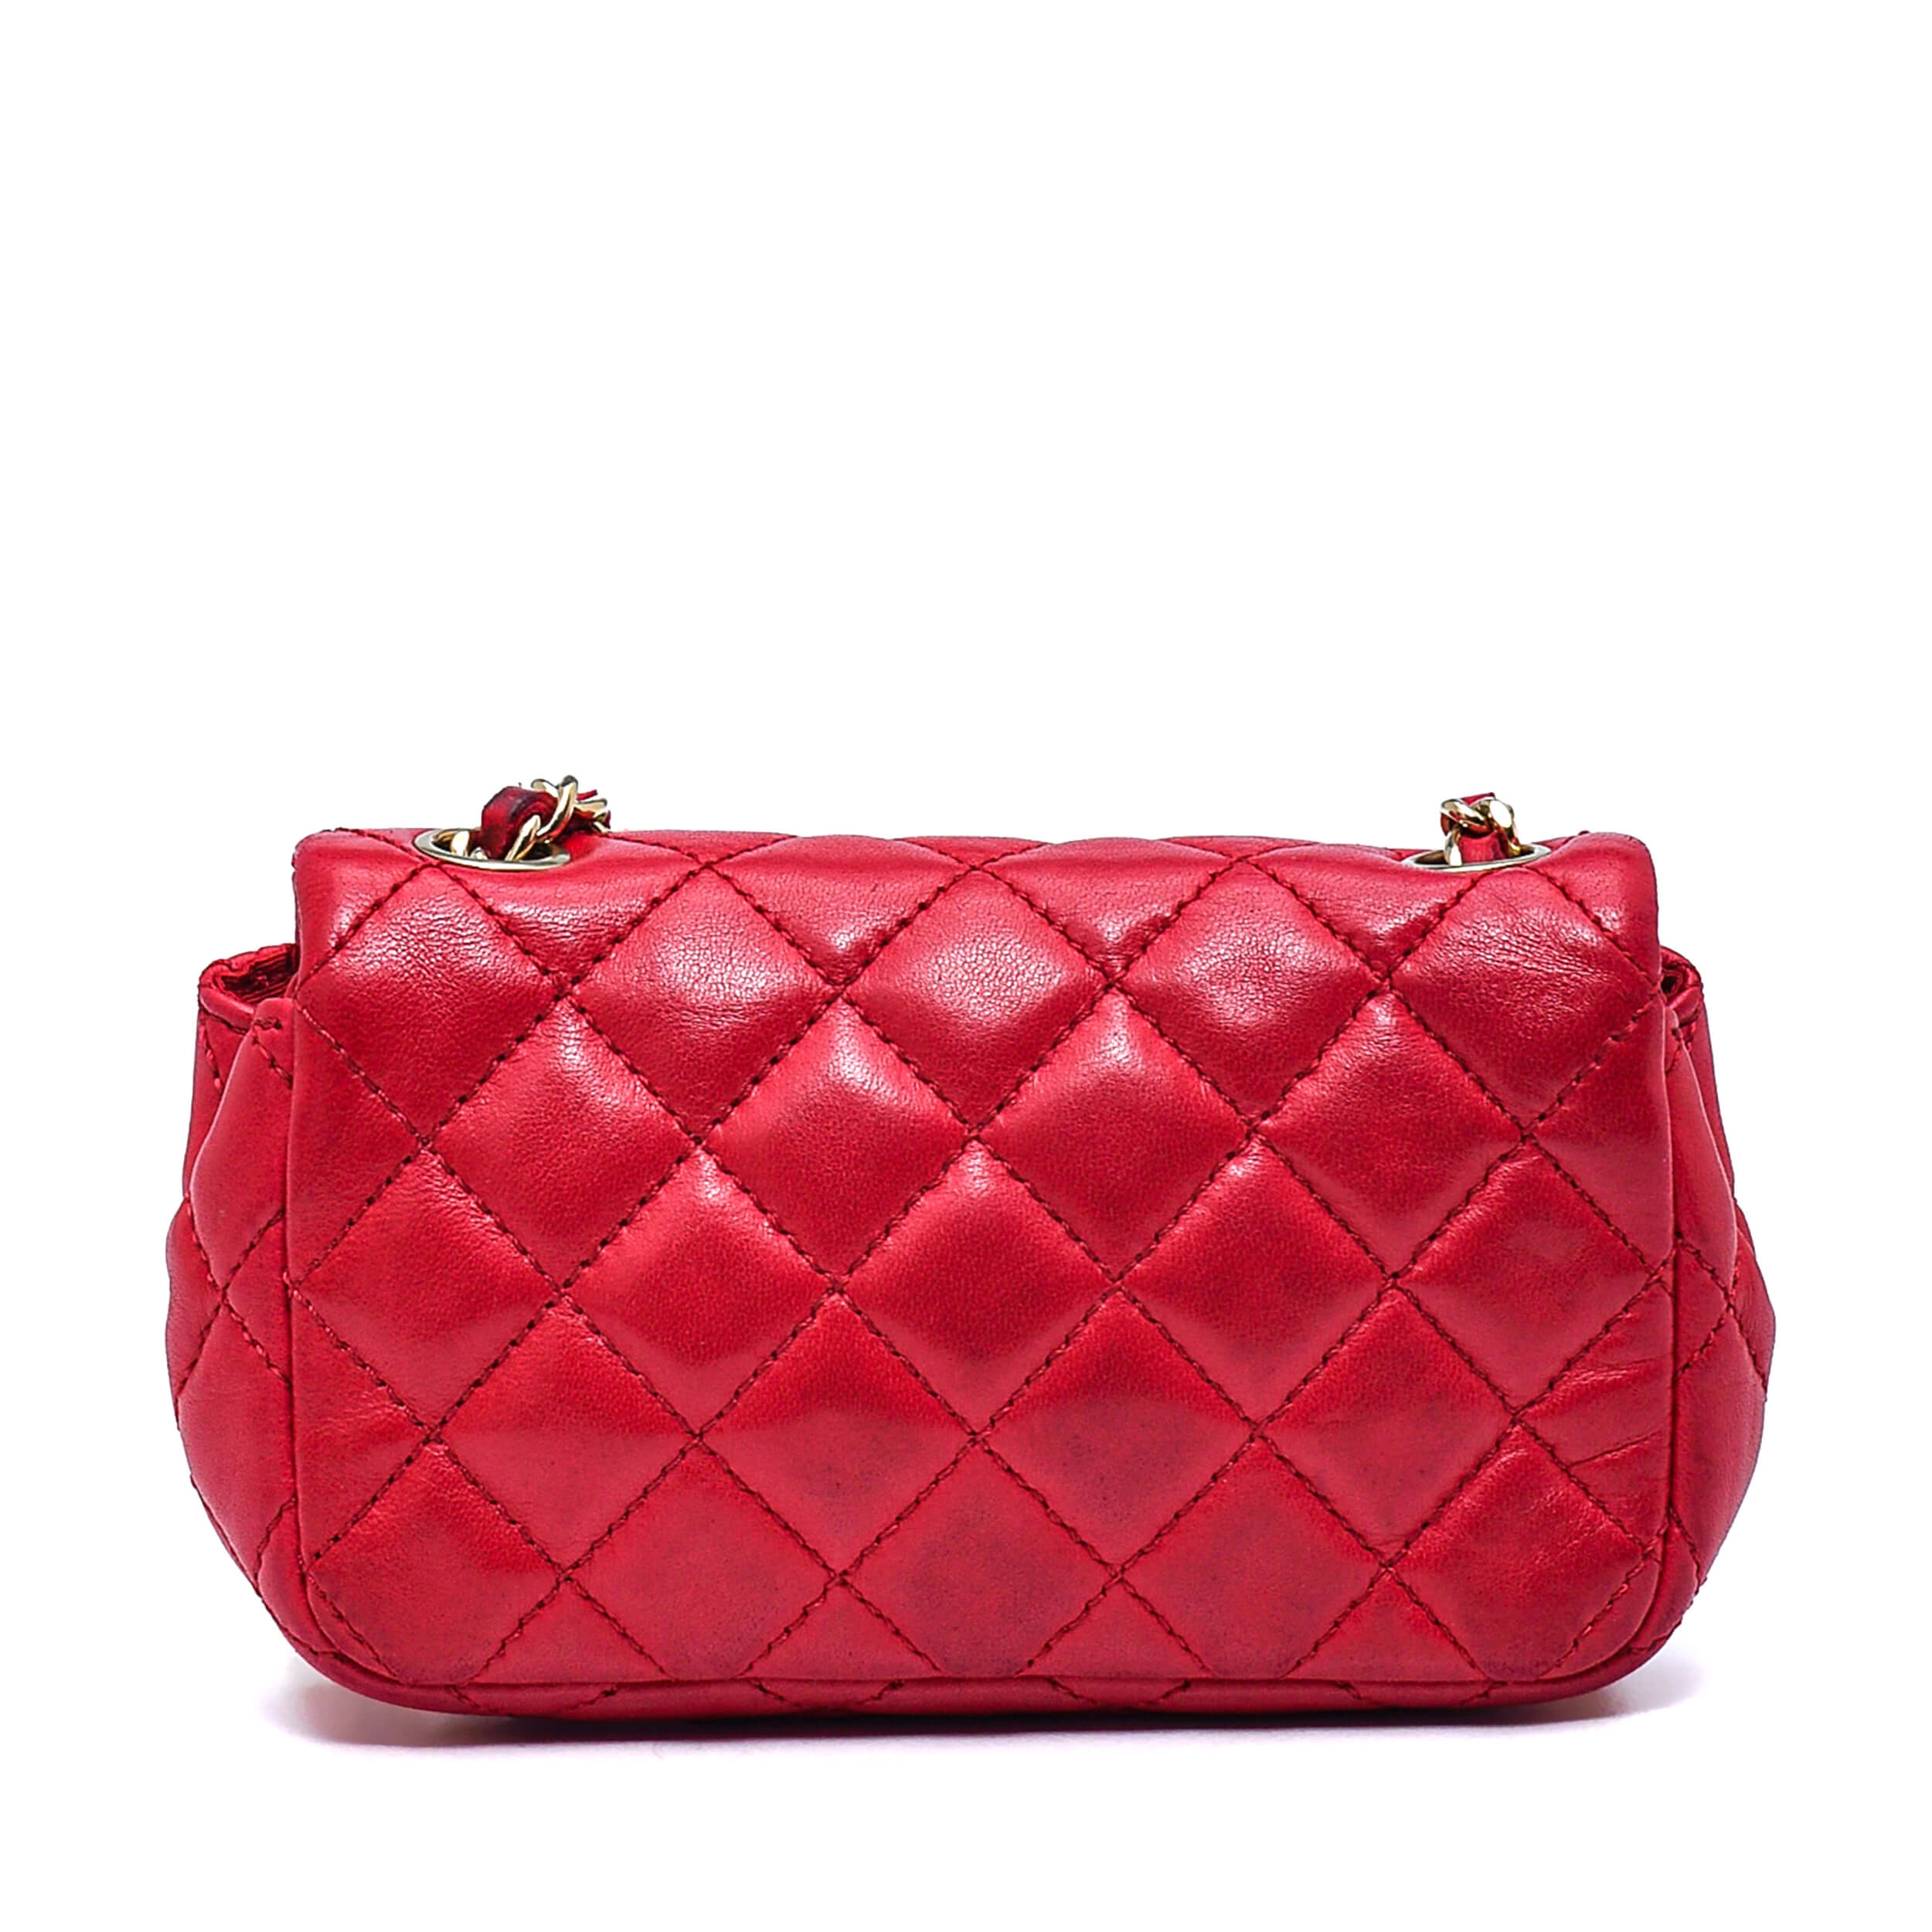 Chanel- Valentine’s Multi Charm RARE Red Quilted Leather Micro Flap Bag